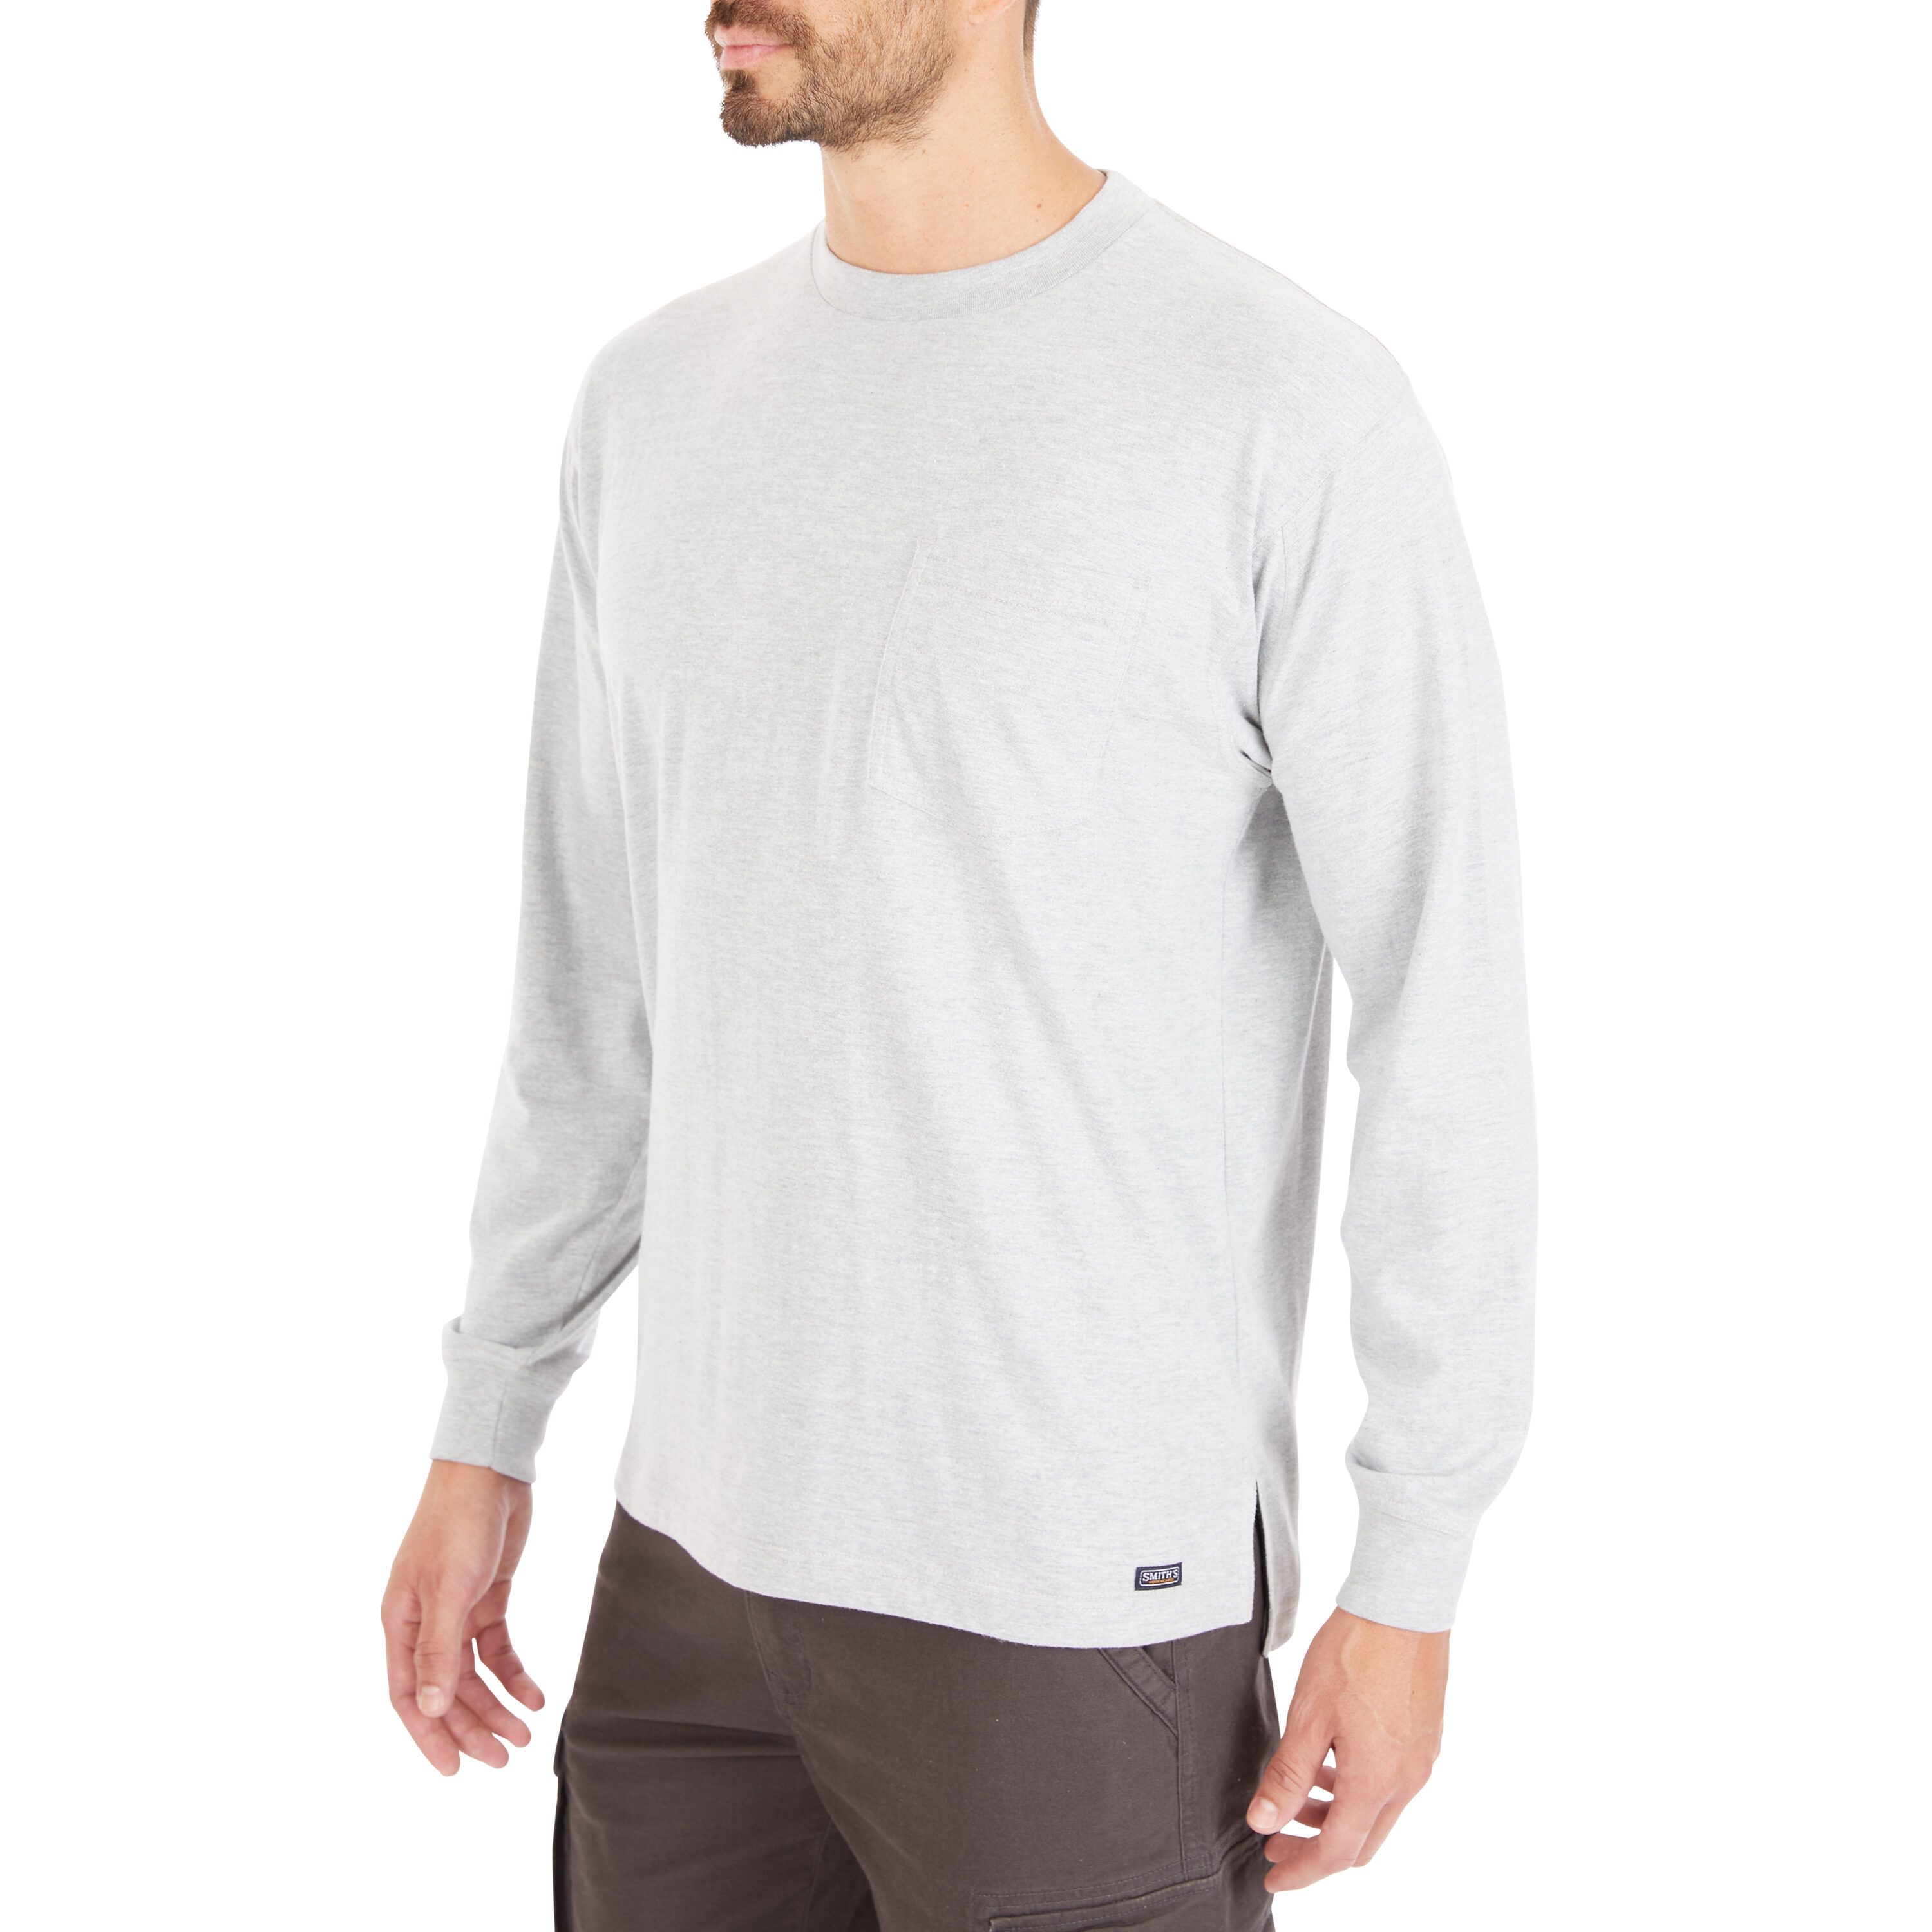 Smith's Workwear Men's Textured Cotton Long sleeve Solid T-shirt Work ...